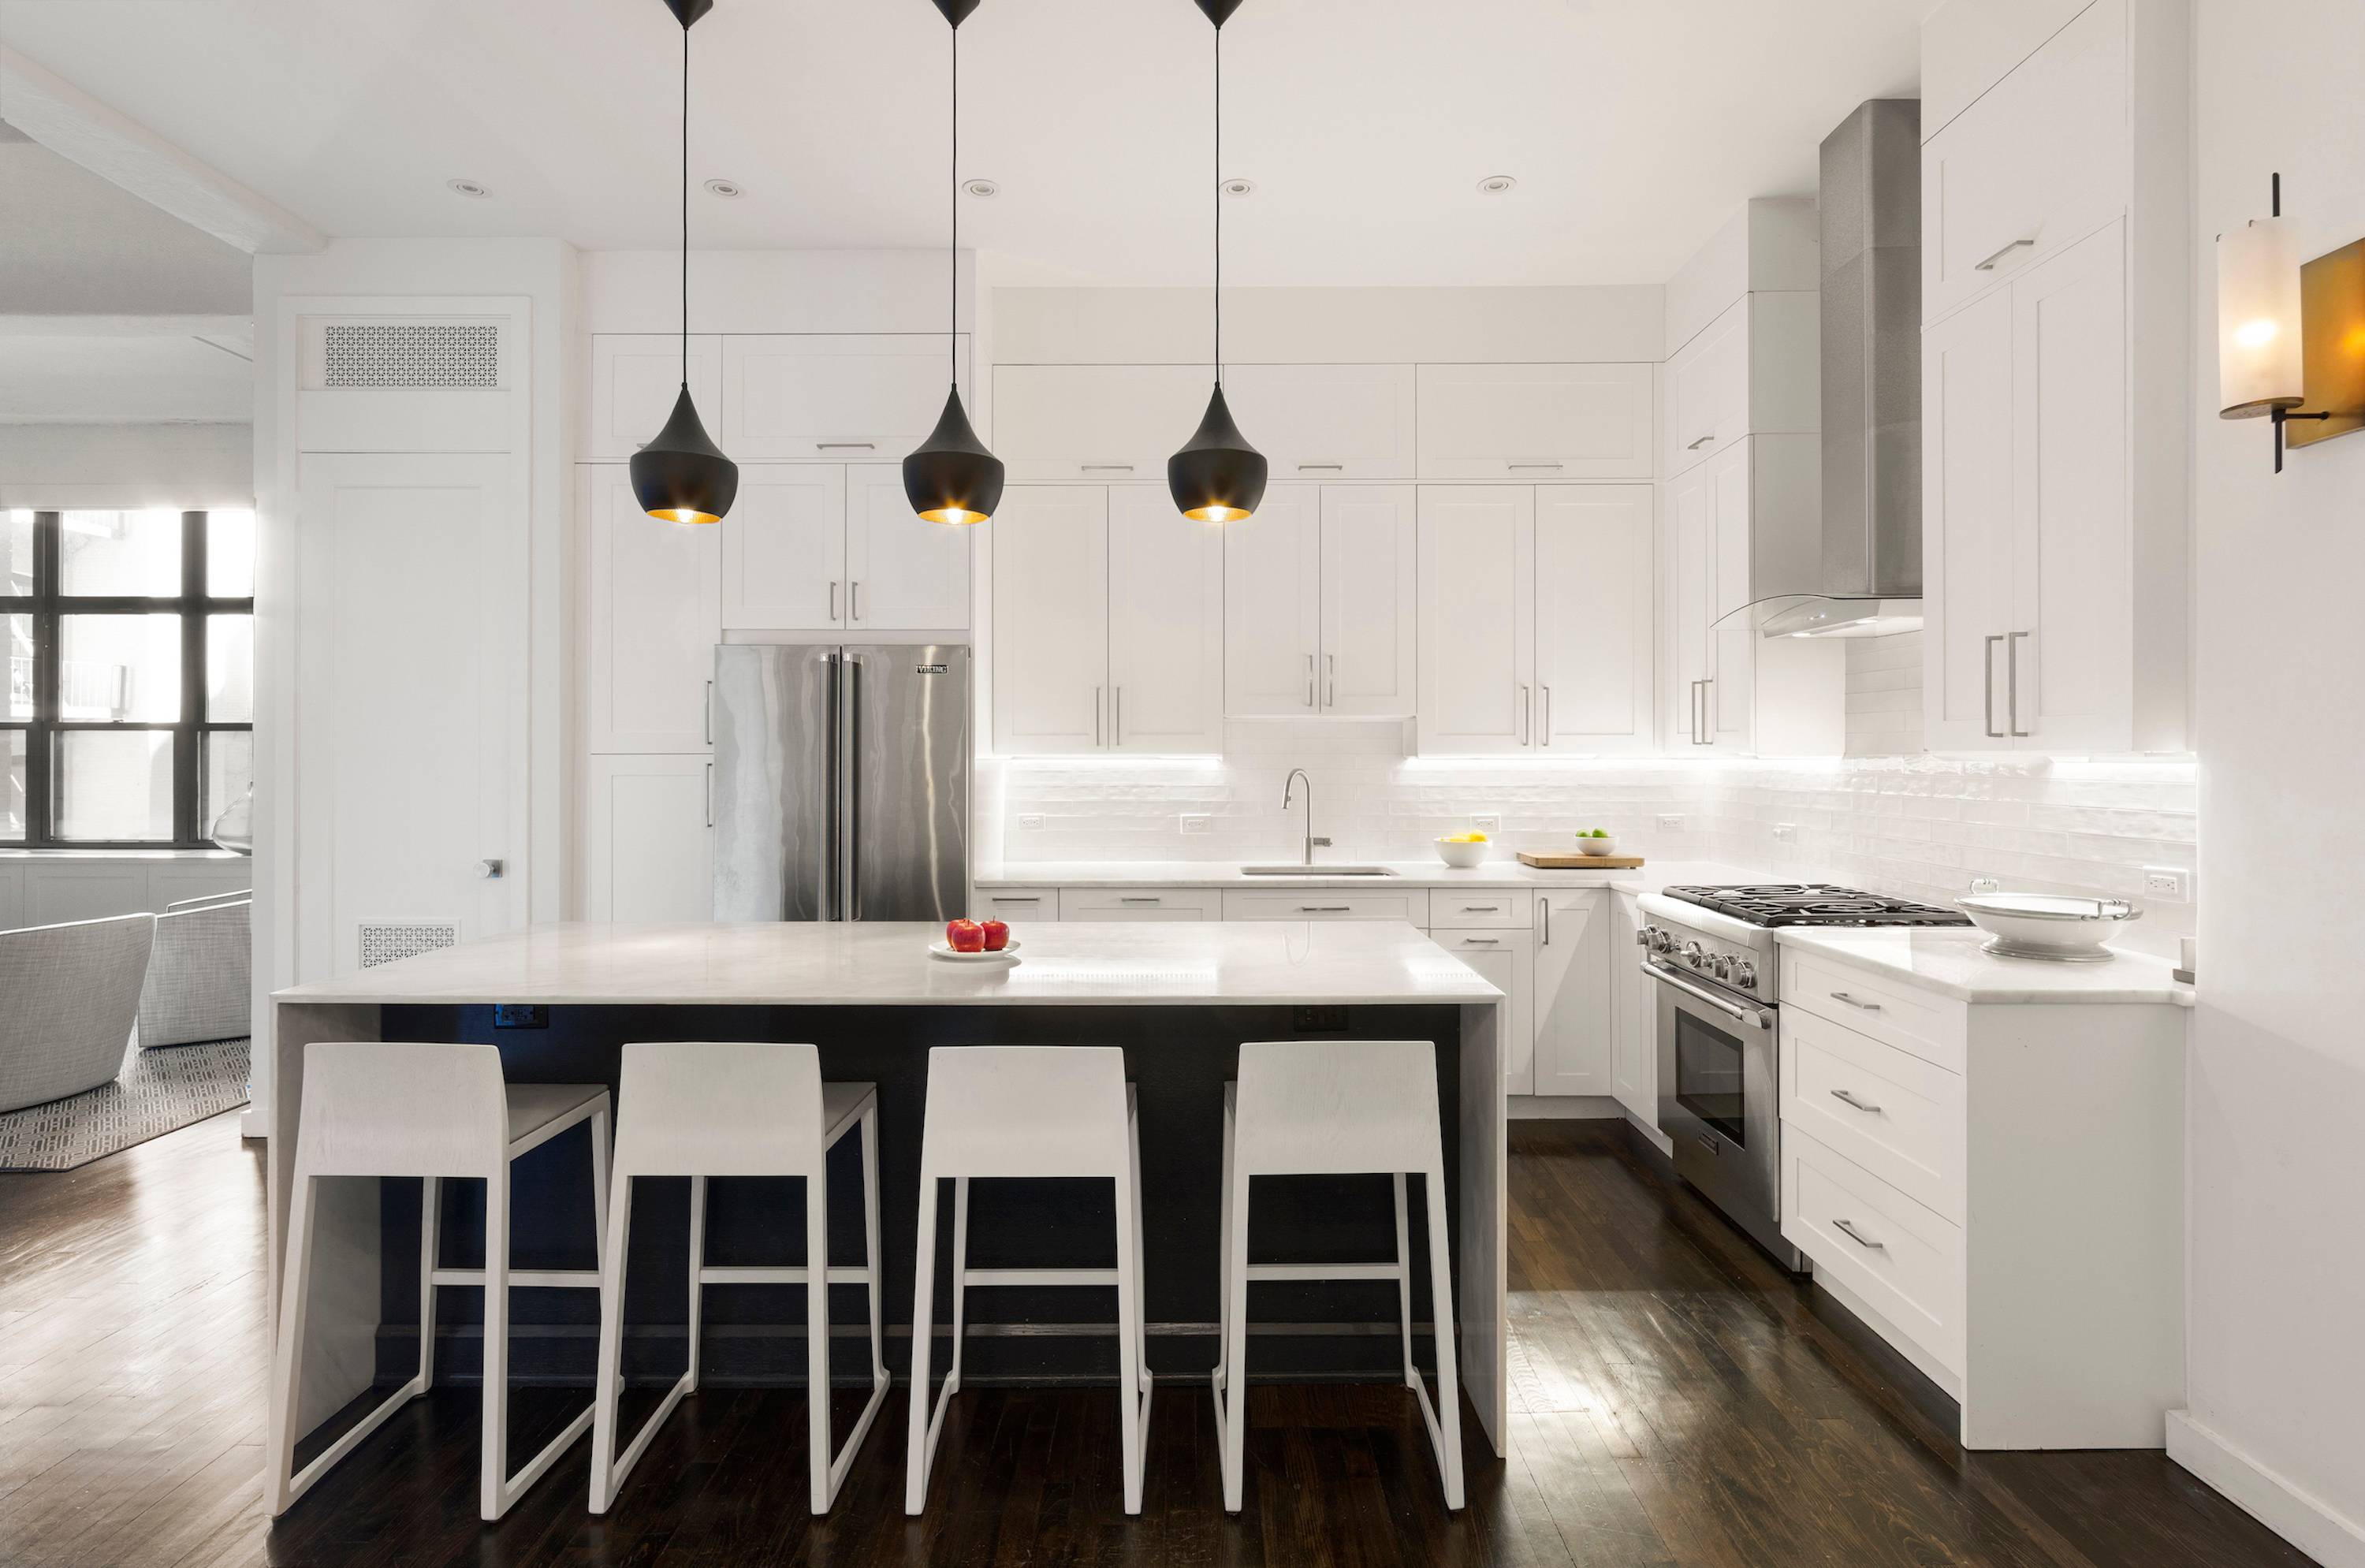 Meticulously renovated with chic, modern details, this pin drop quiet three bedroom, two bathroom plus den home is the perfect city sanctuary where Chelsea meets the West Village.